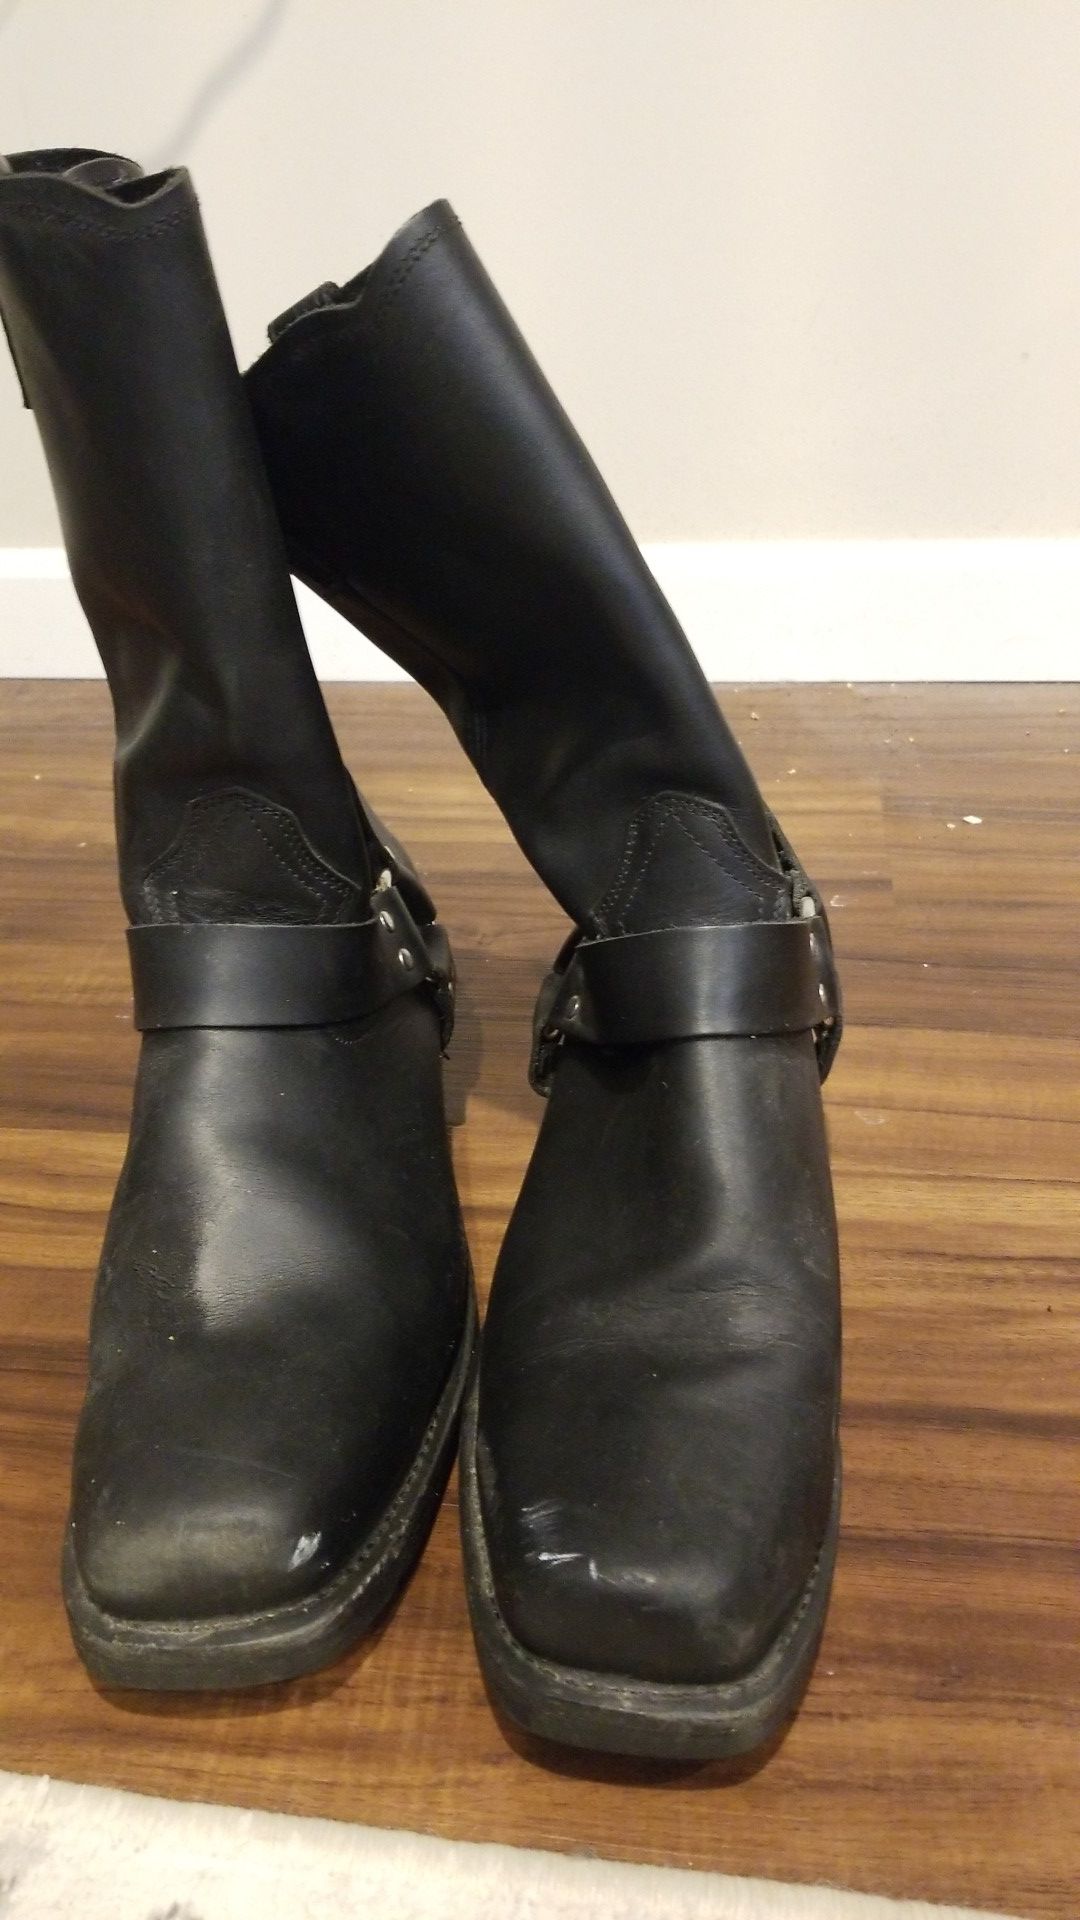 Dingo boots western work leather black motorcycle size 14